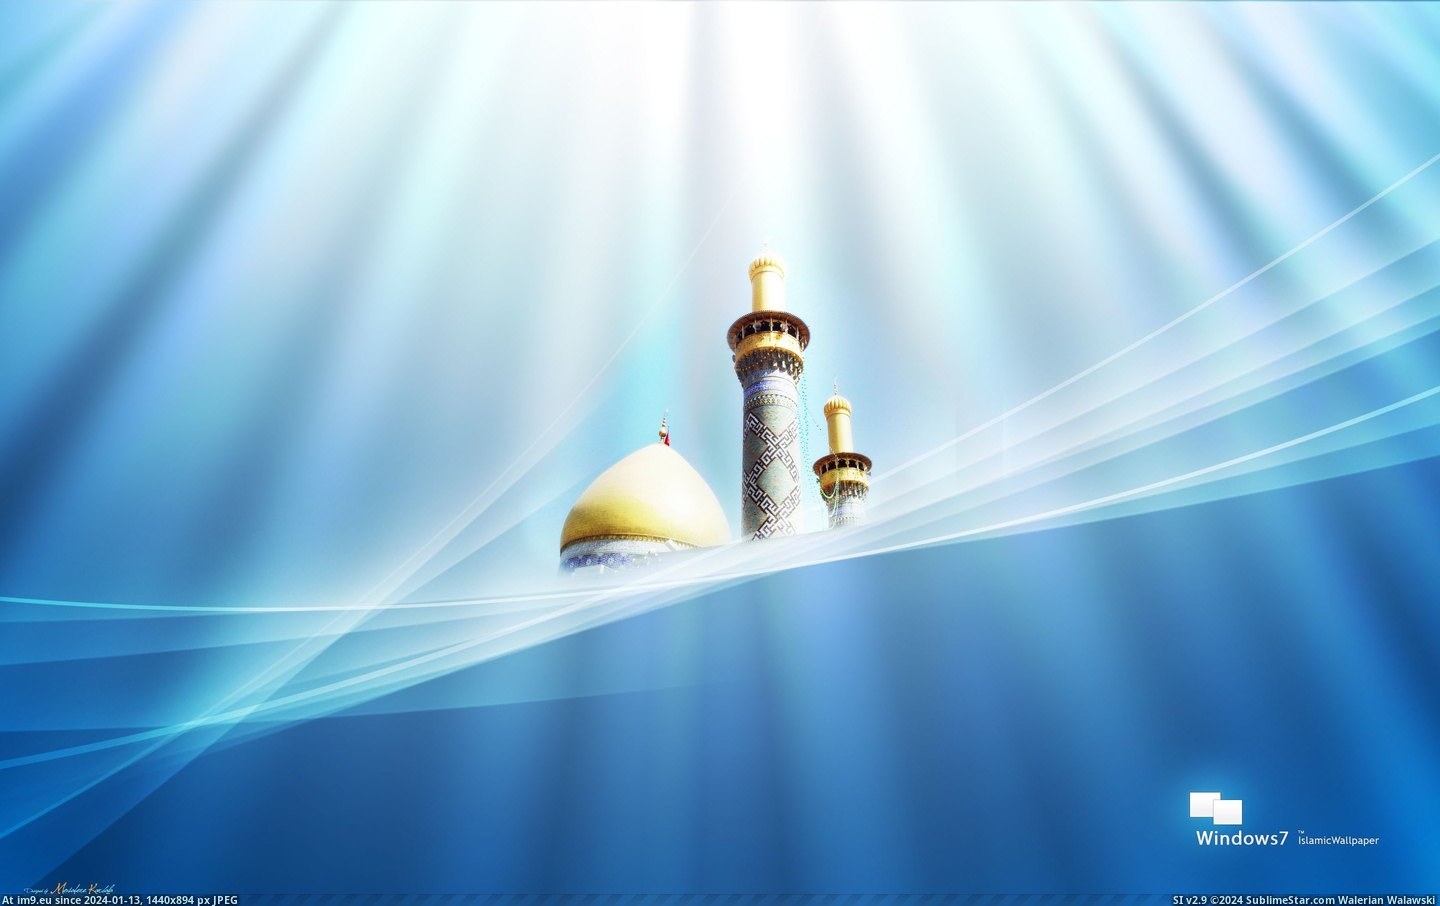 Windows 7 Islamic wallpaper (in Islamic Wallpapers and Images)